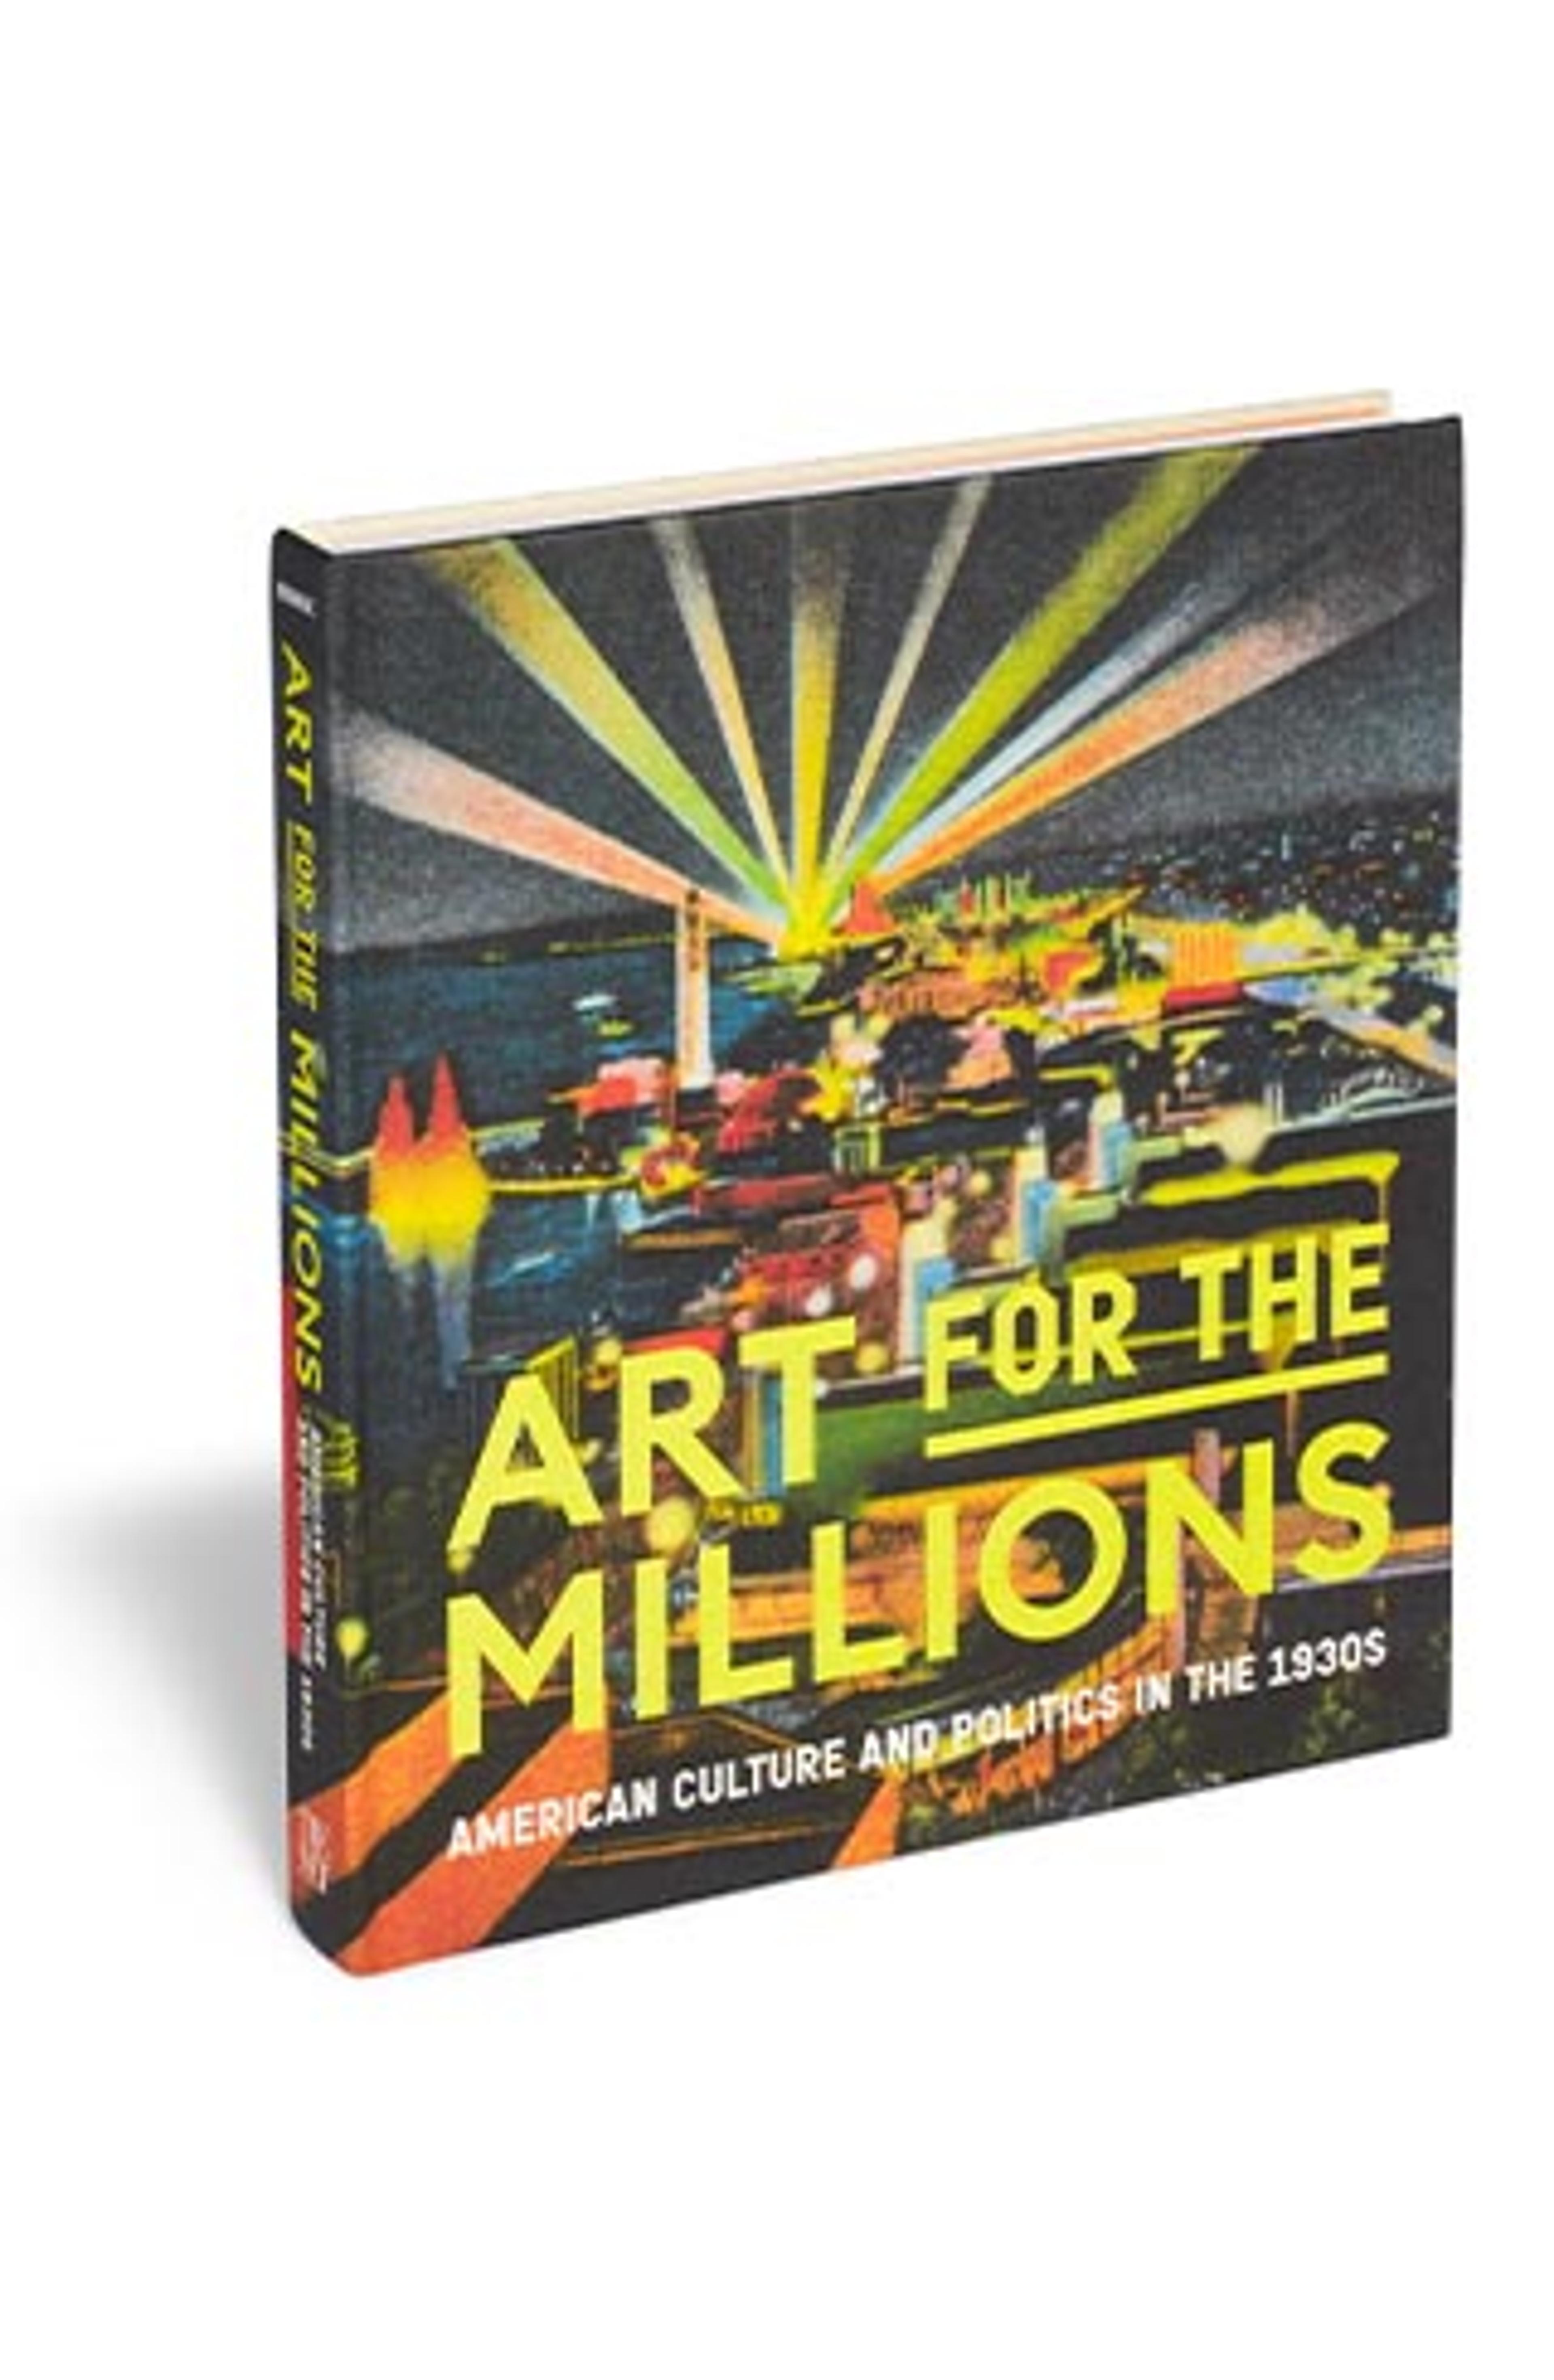 Catalogue with yellow text that reads "ART FOR THE MILLIONS."